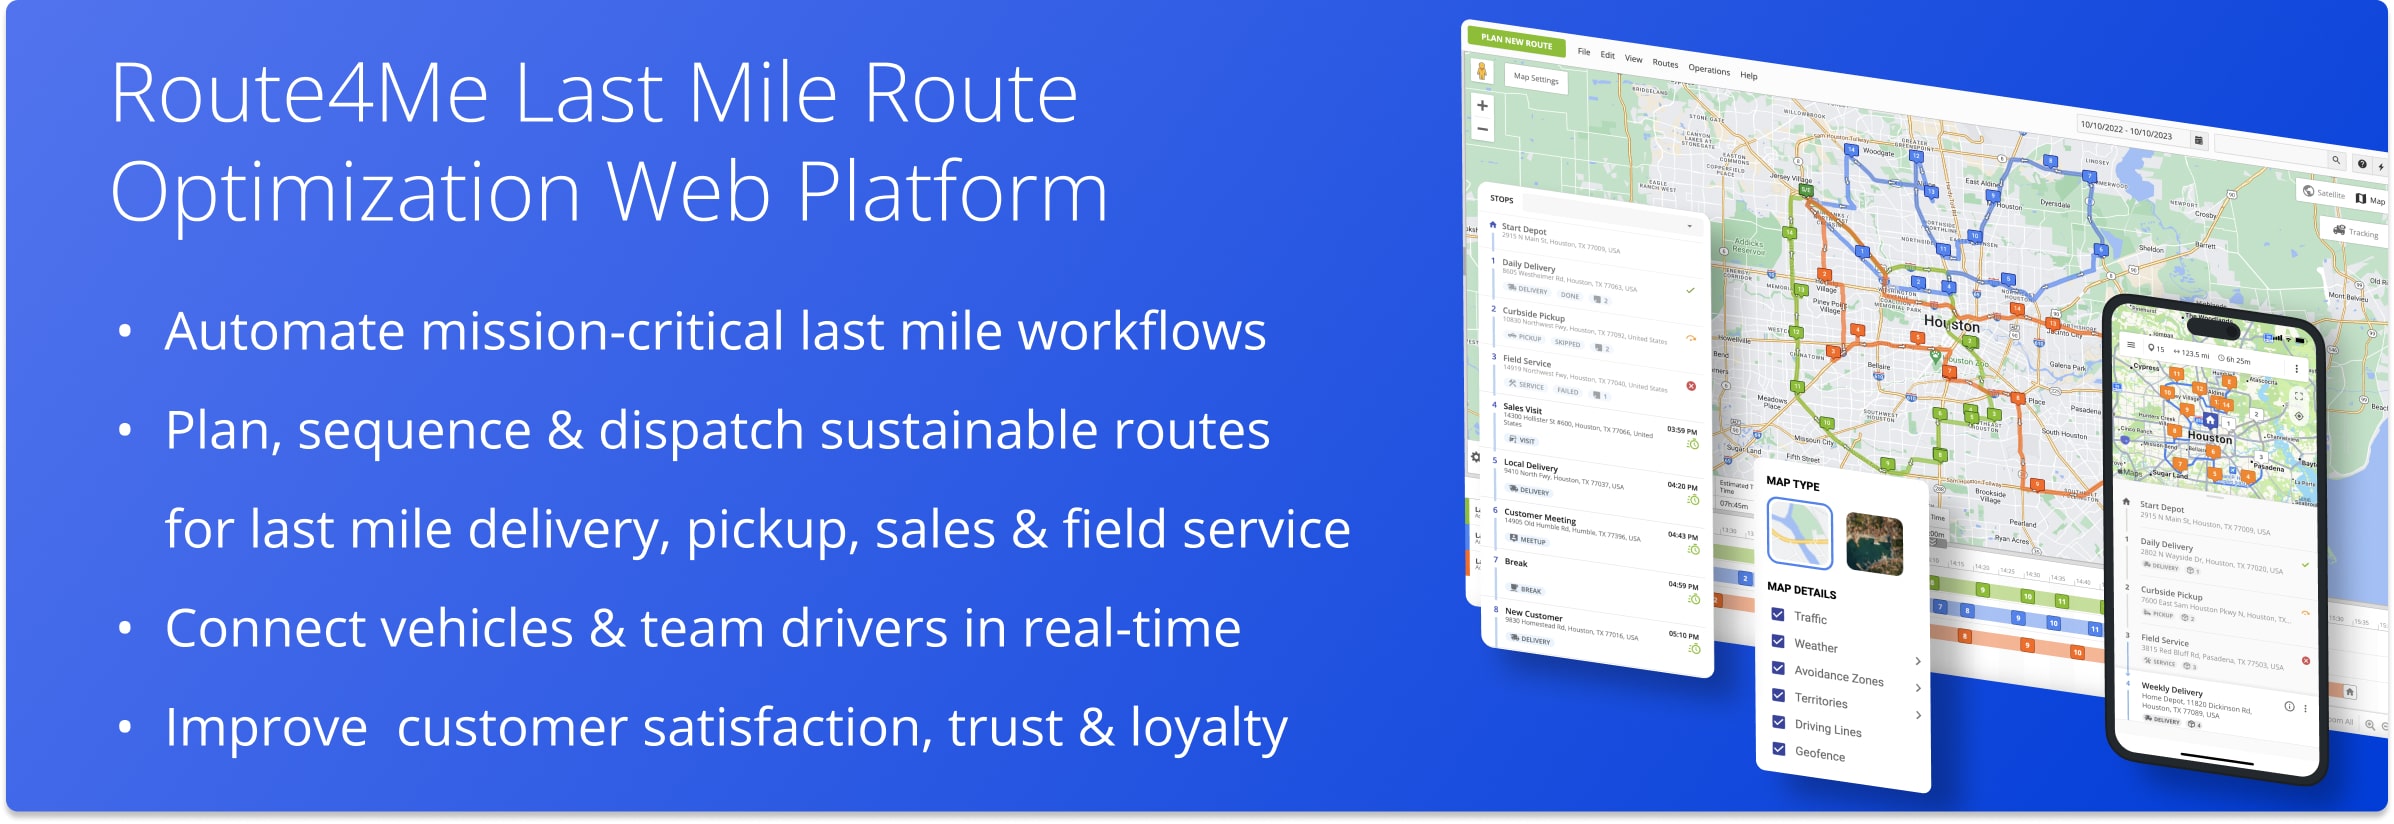 Route4Me Last Mile Route Optimization Web Platform Getting Started Guide.